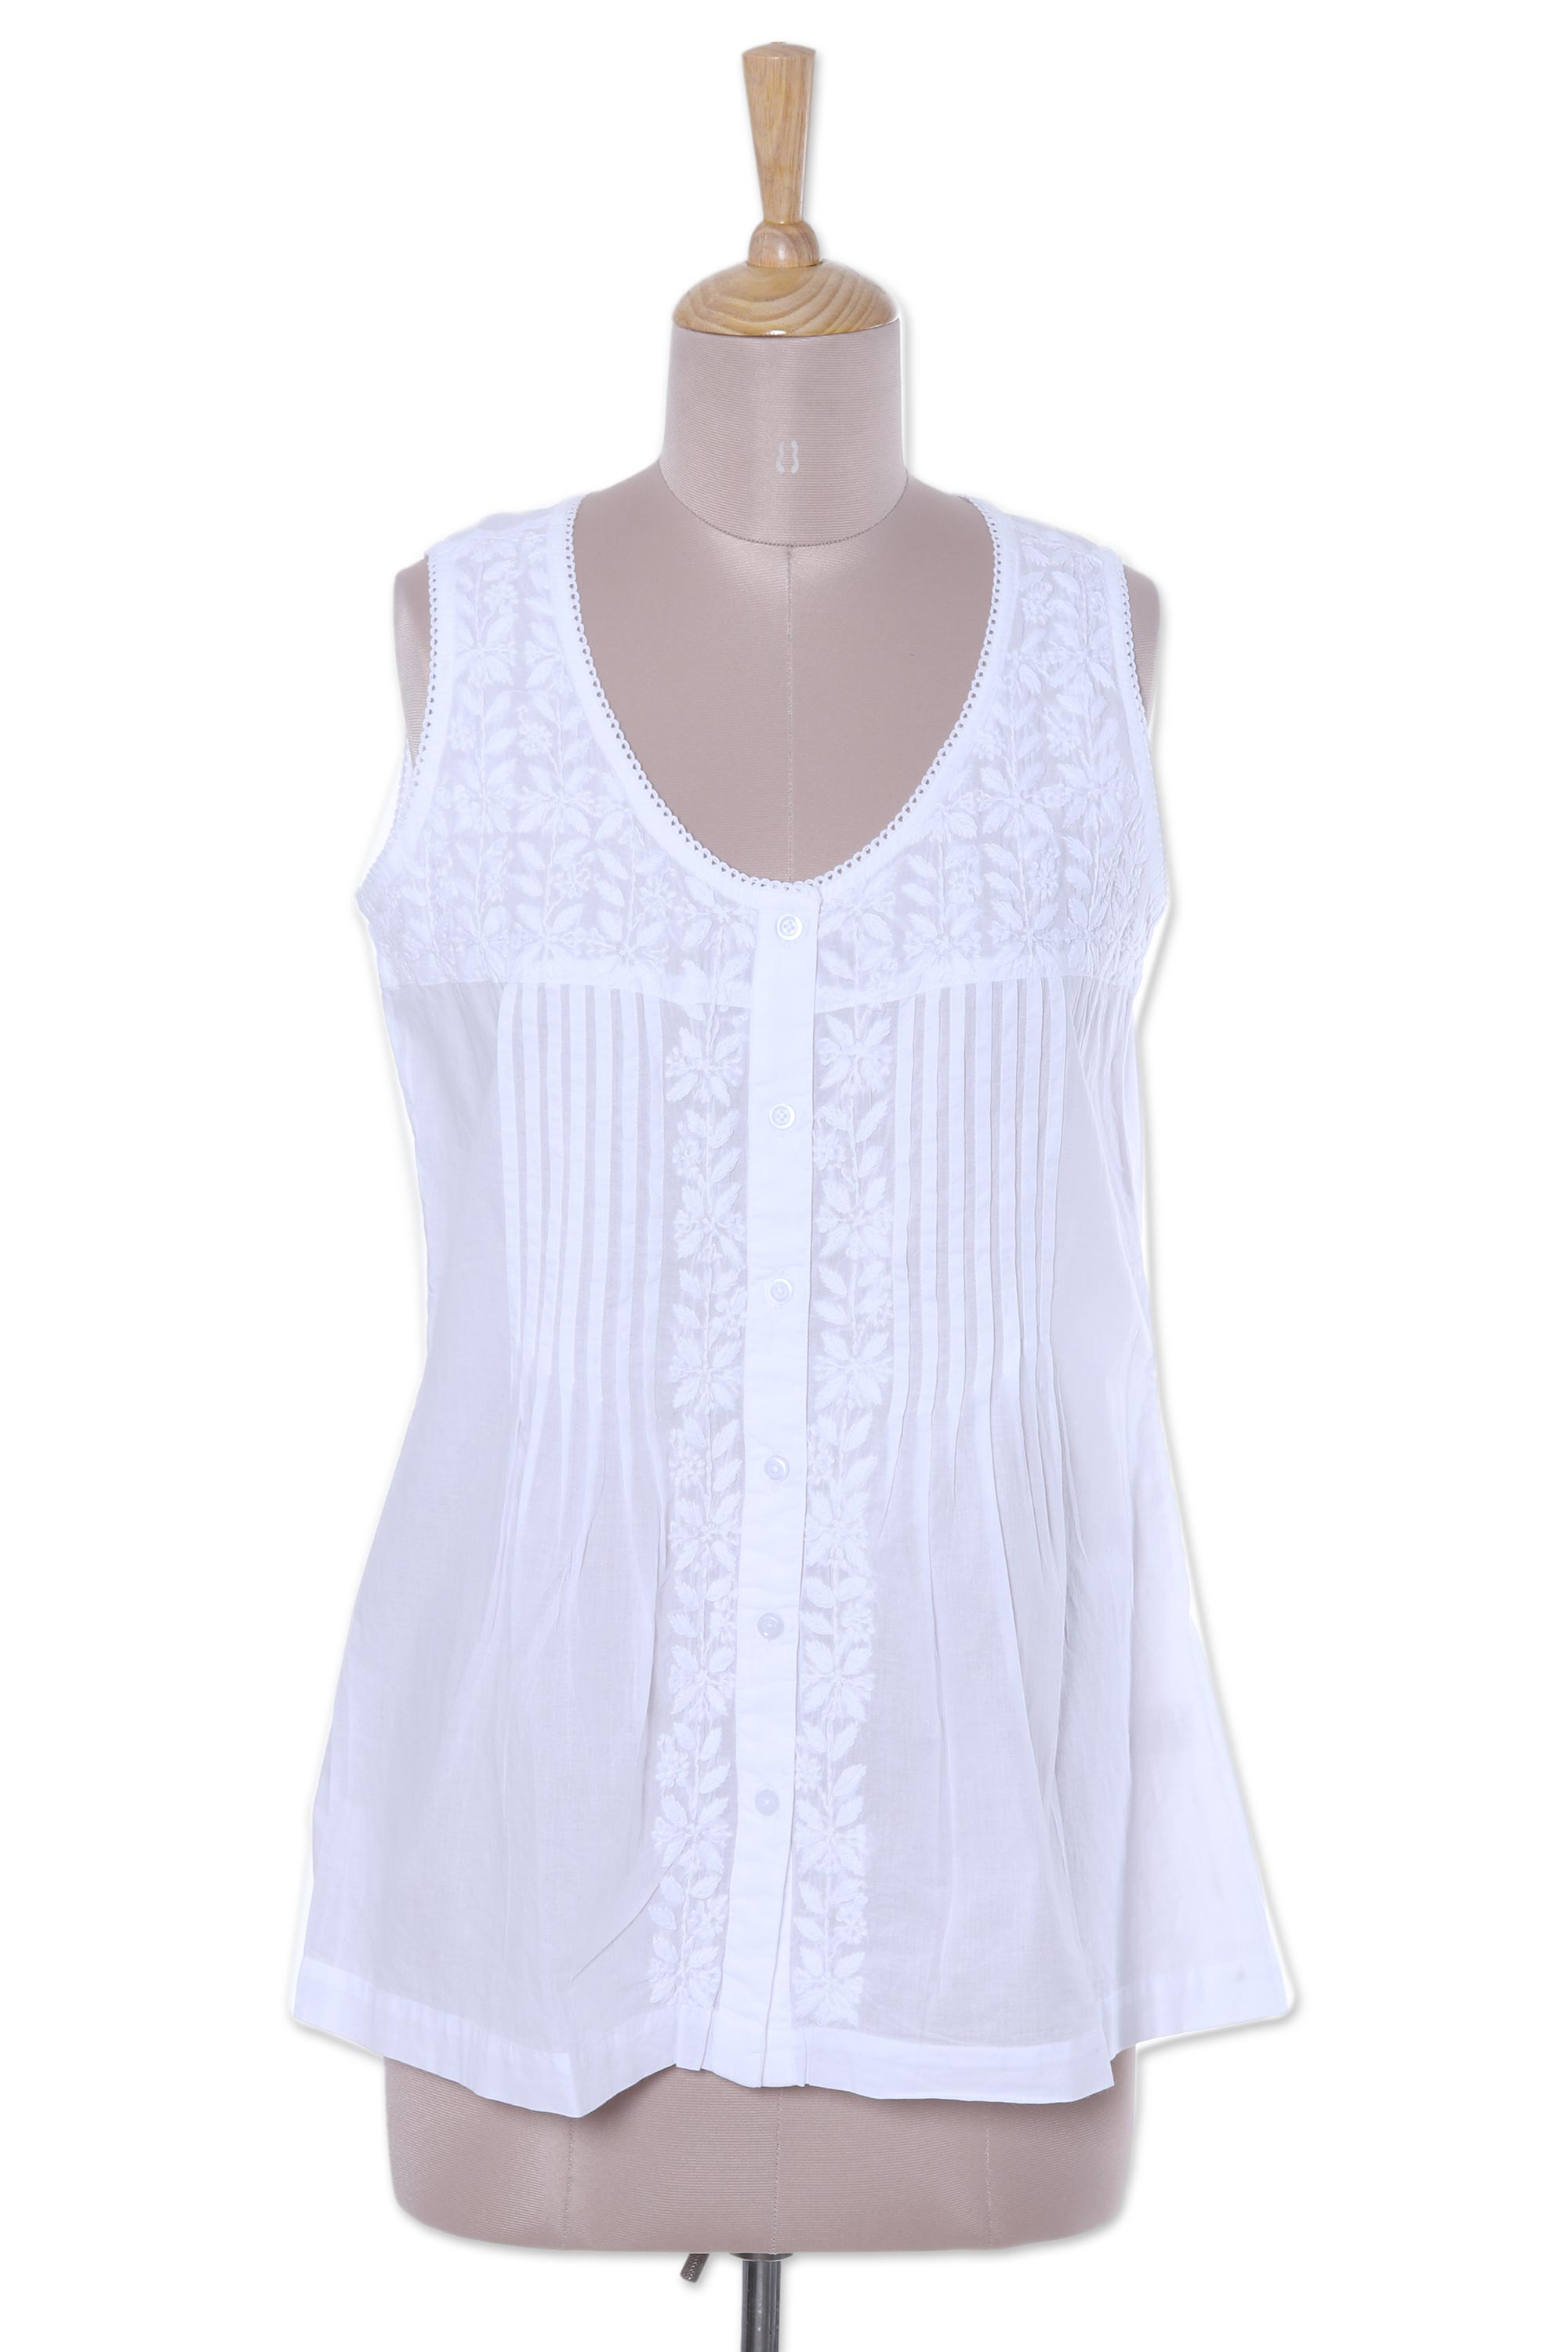 UNICEF Market | Sleeveless Floral White Blouse Hand Embroidered in ...